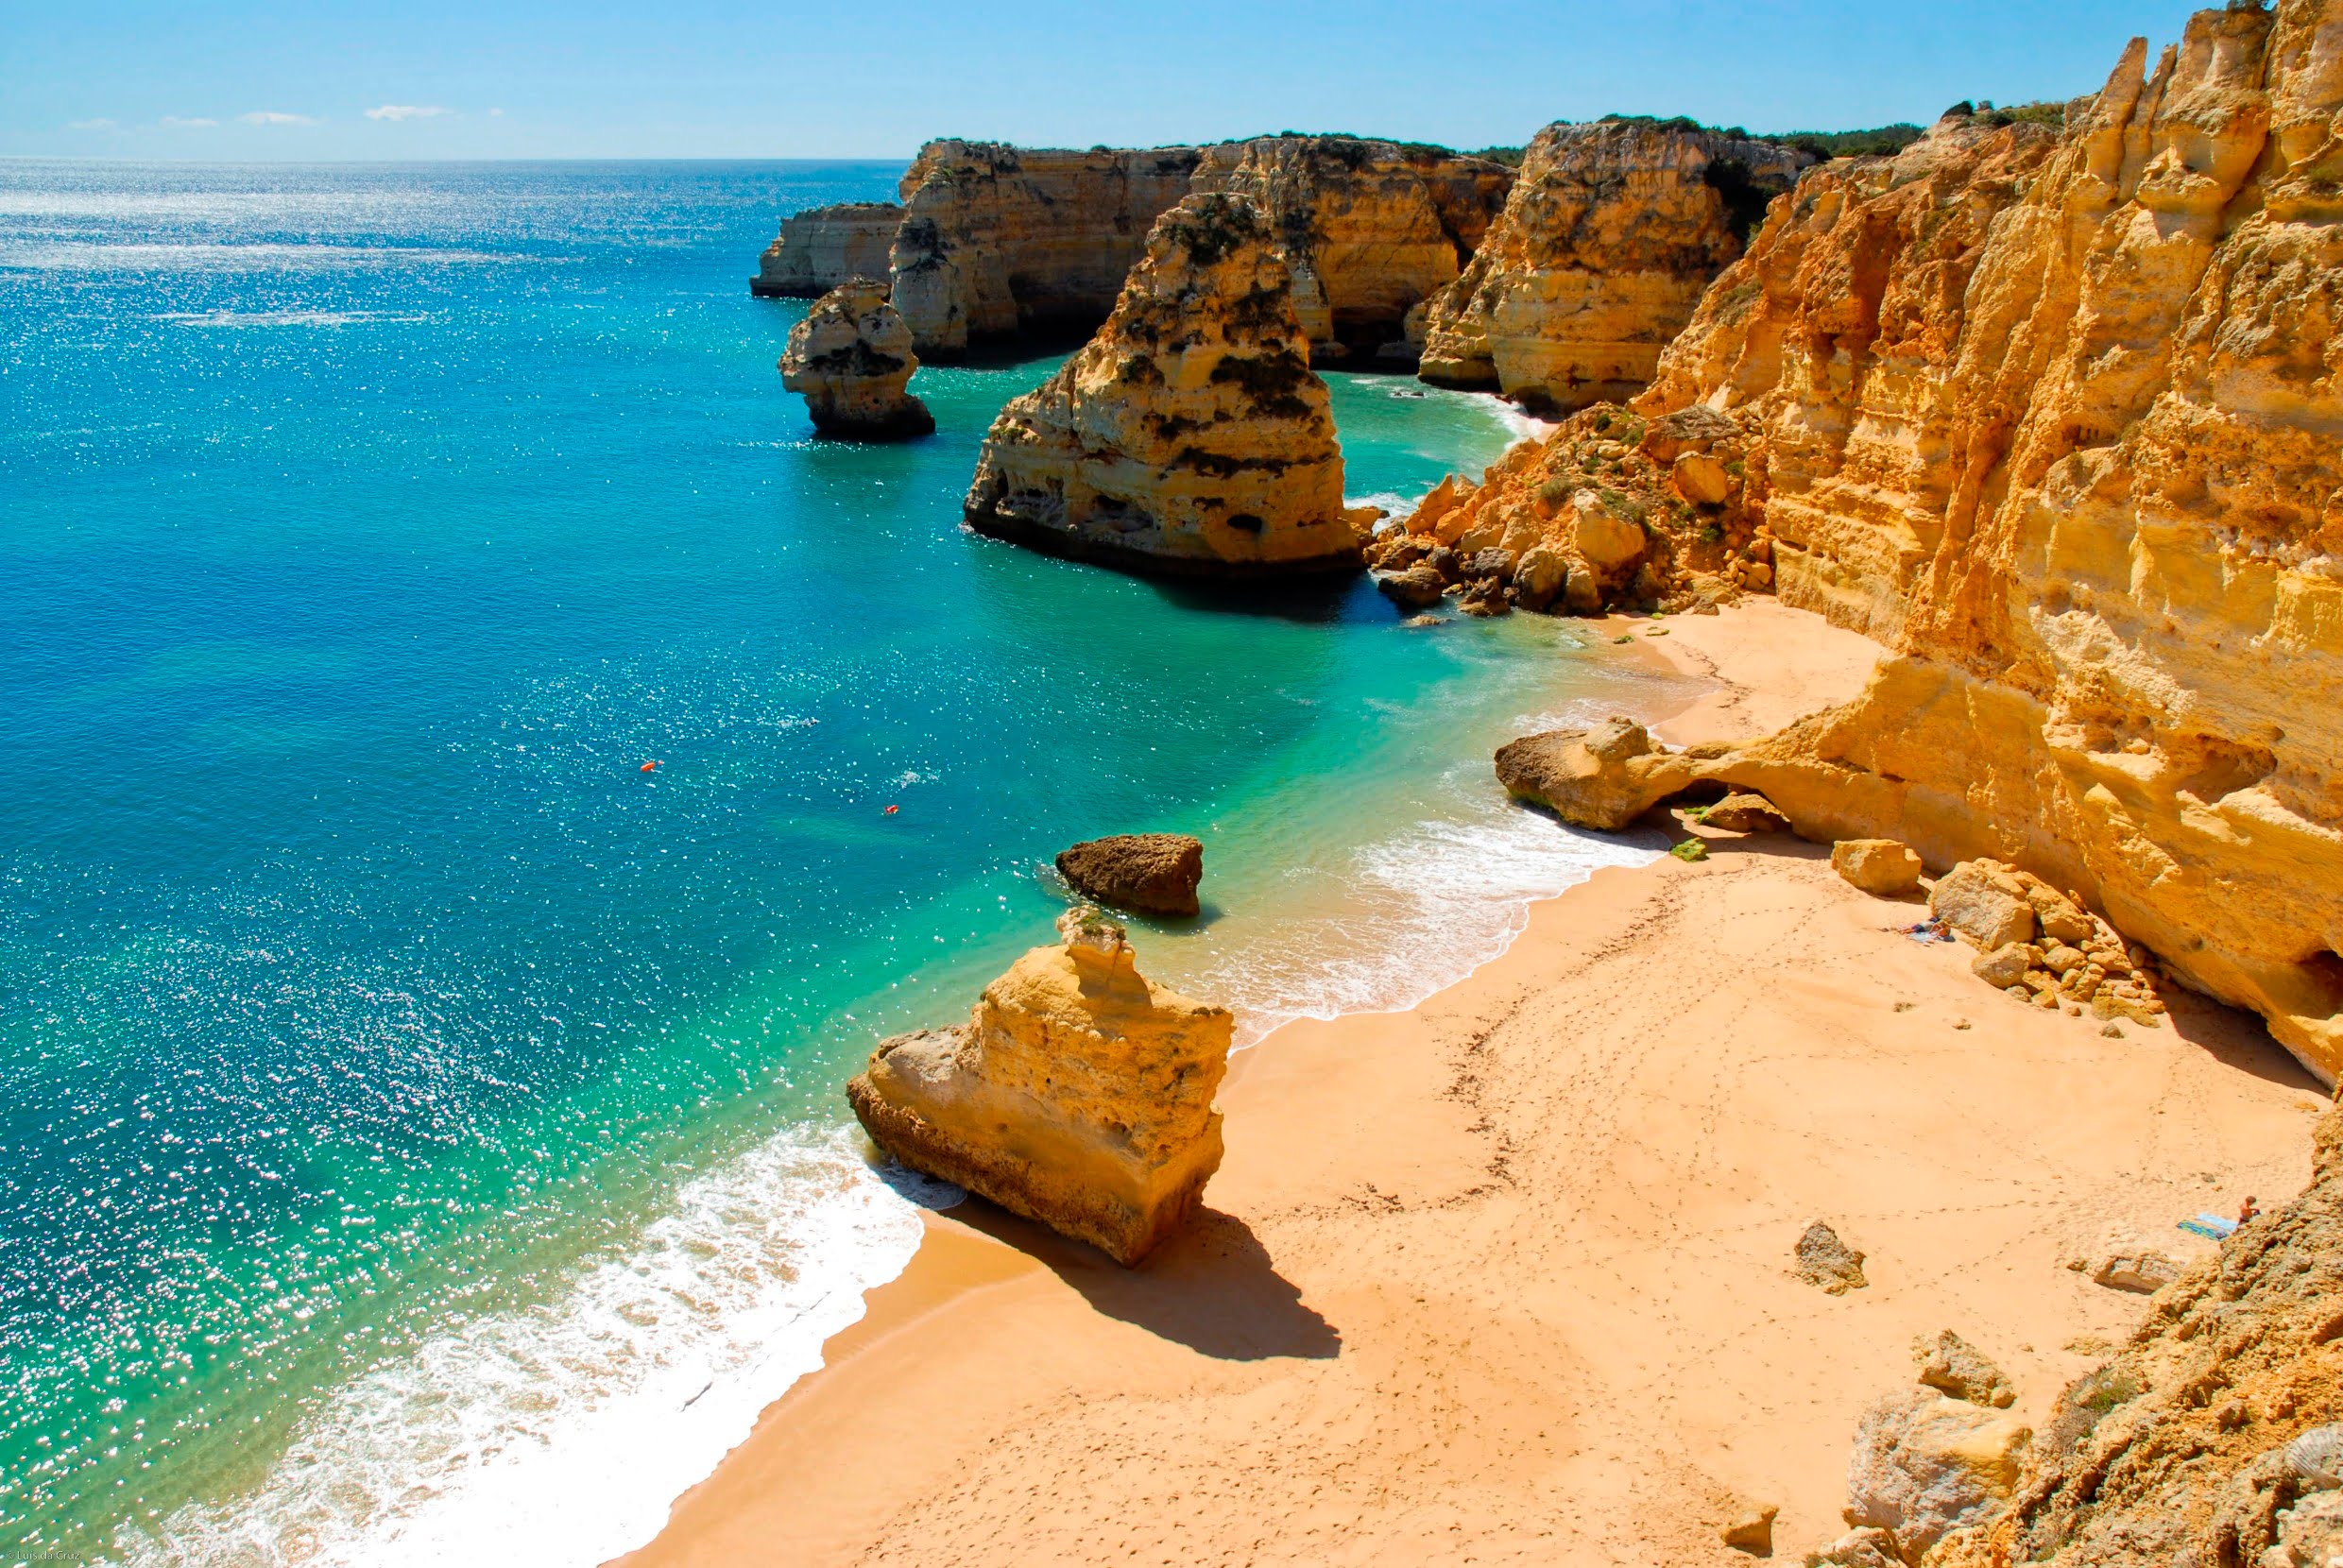 The Retirement in Portugal 2019: We give 4 good reasons